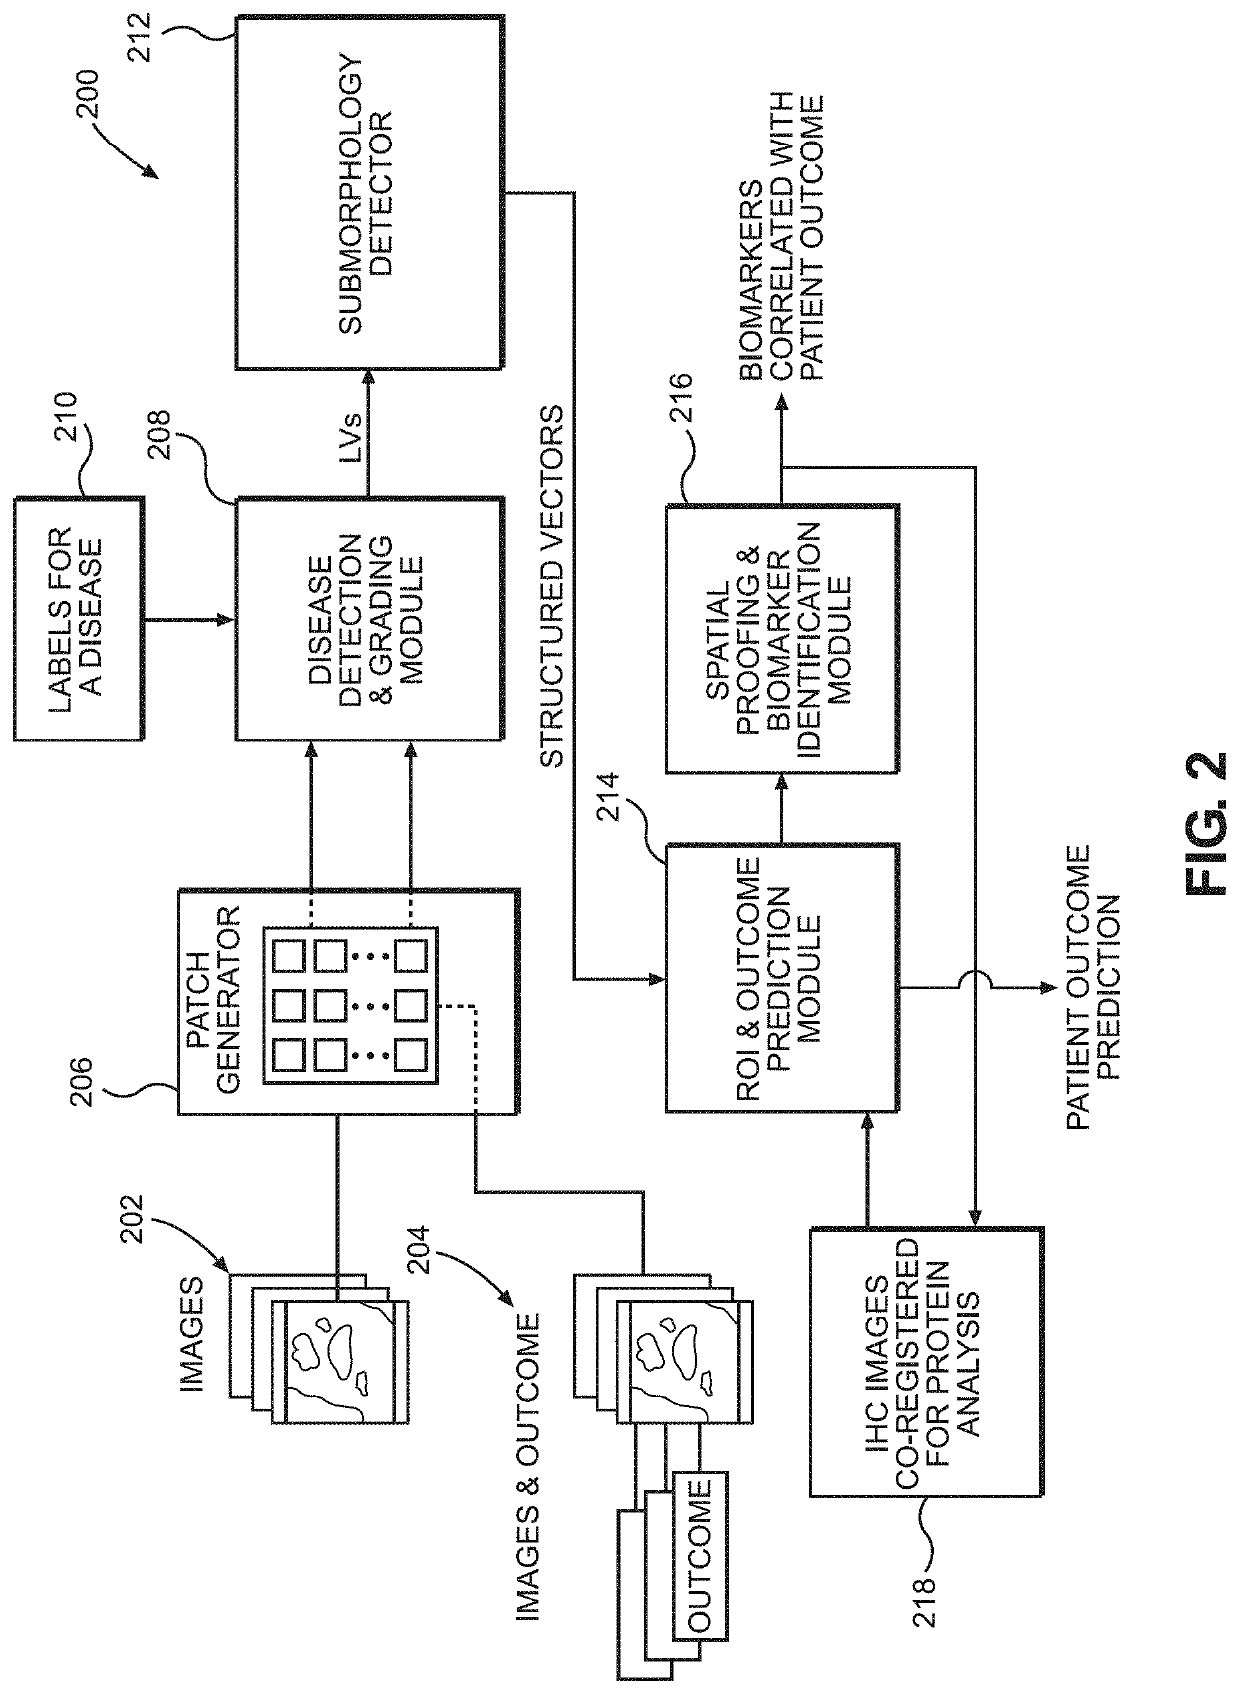 Systems and methods for predicting patient outcome to cancer therapy